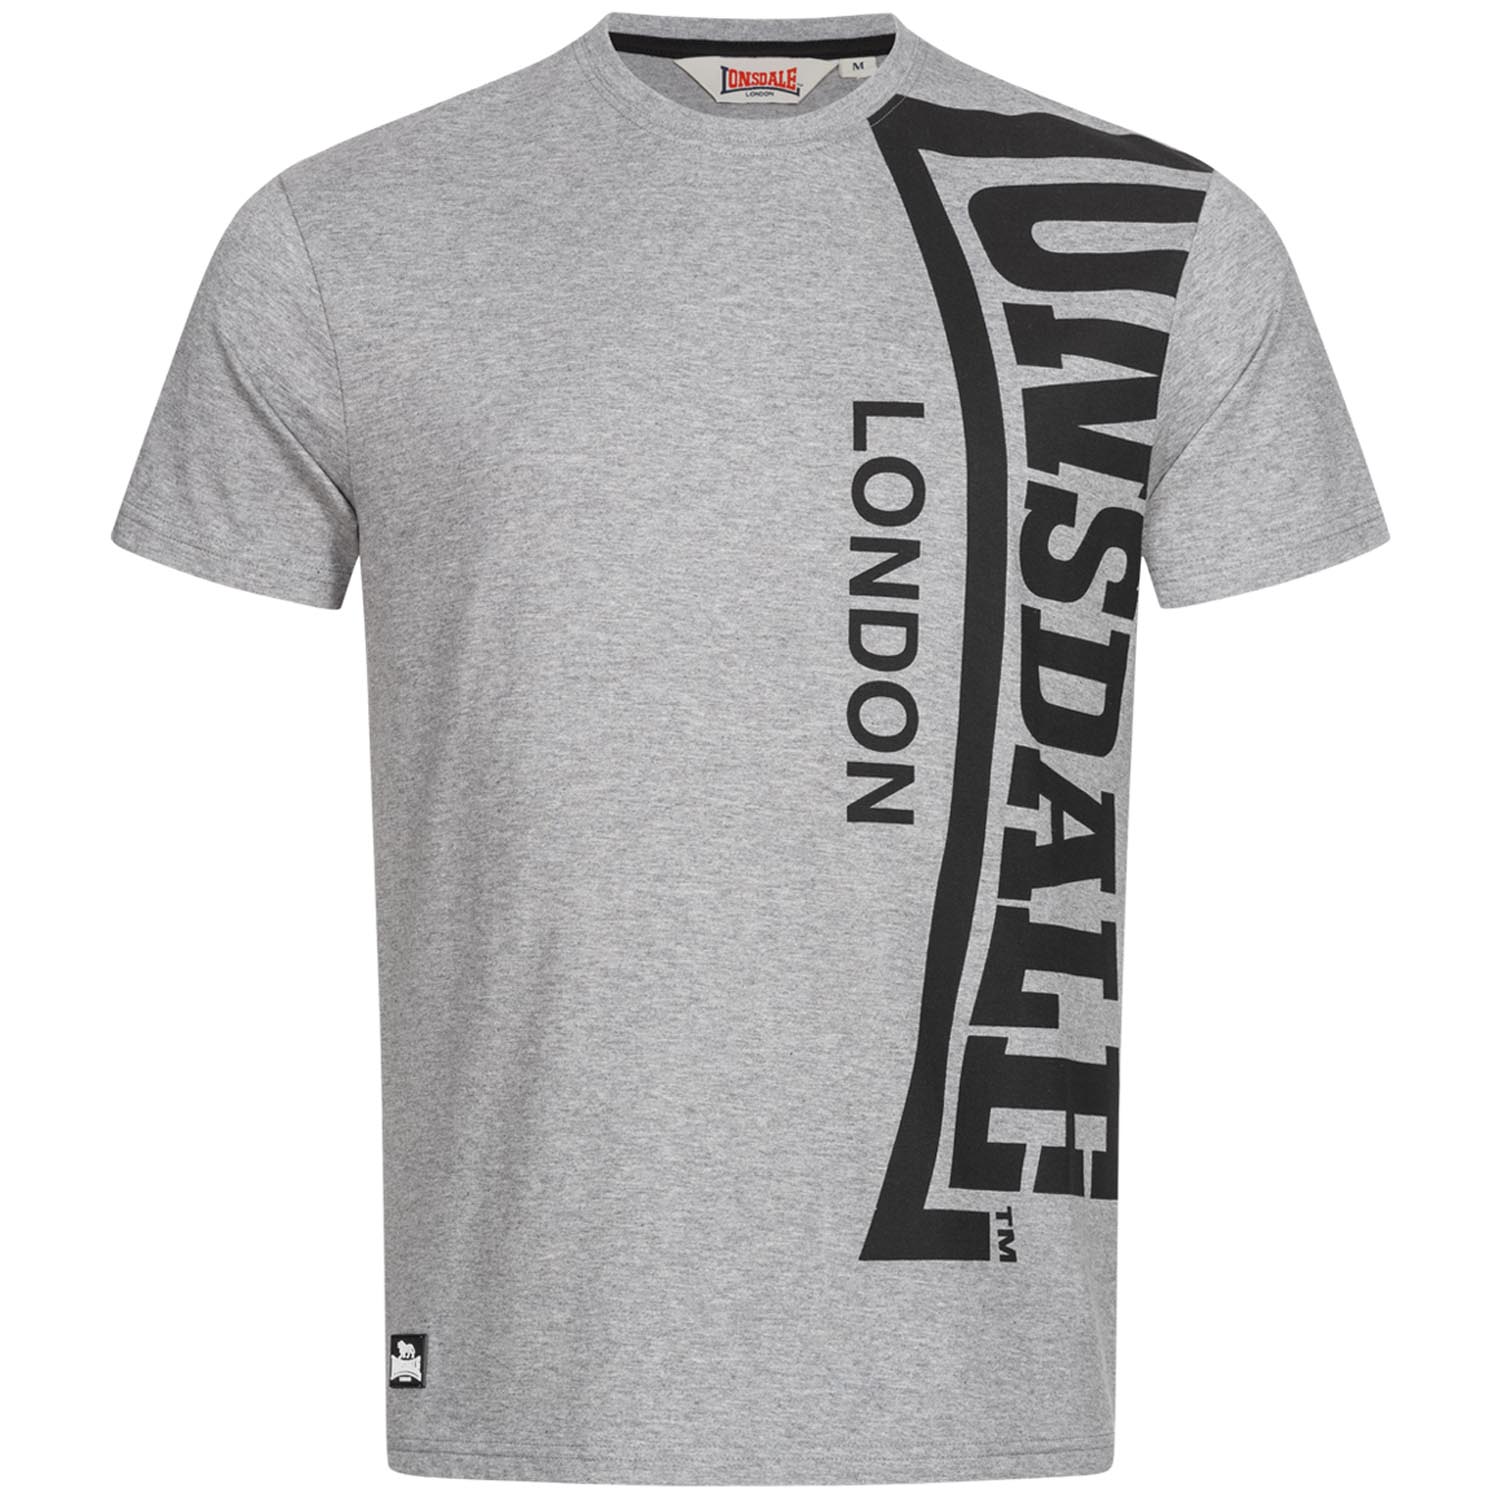 Lonsdale T-Shirt, Holyrood, grey S